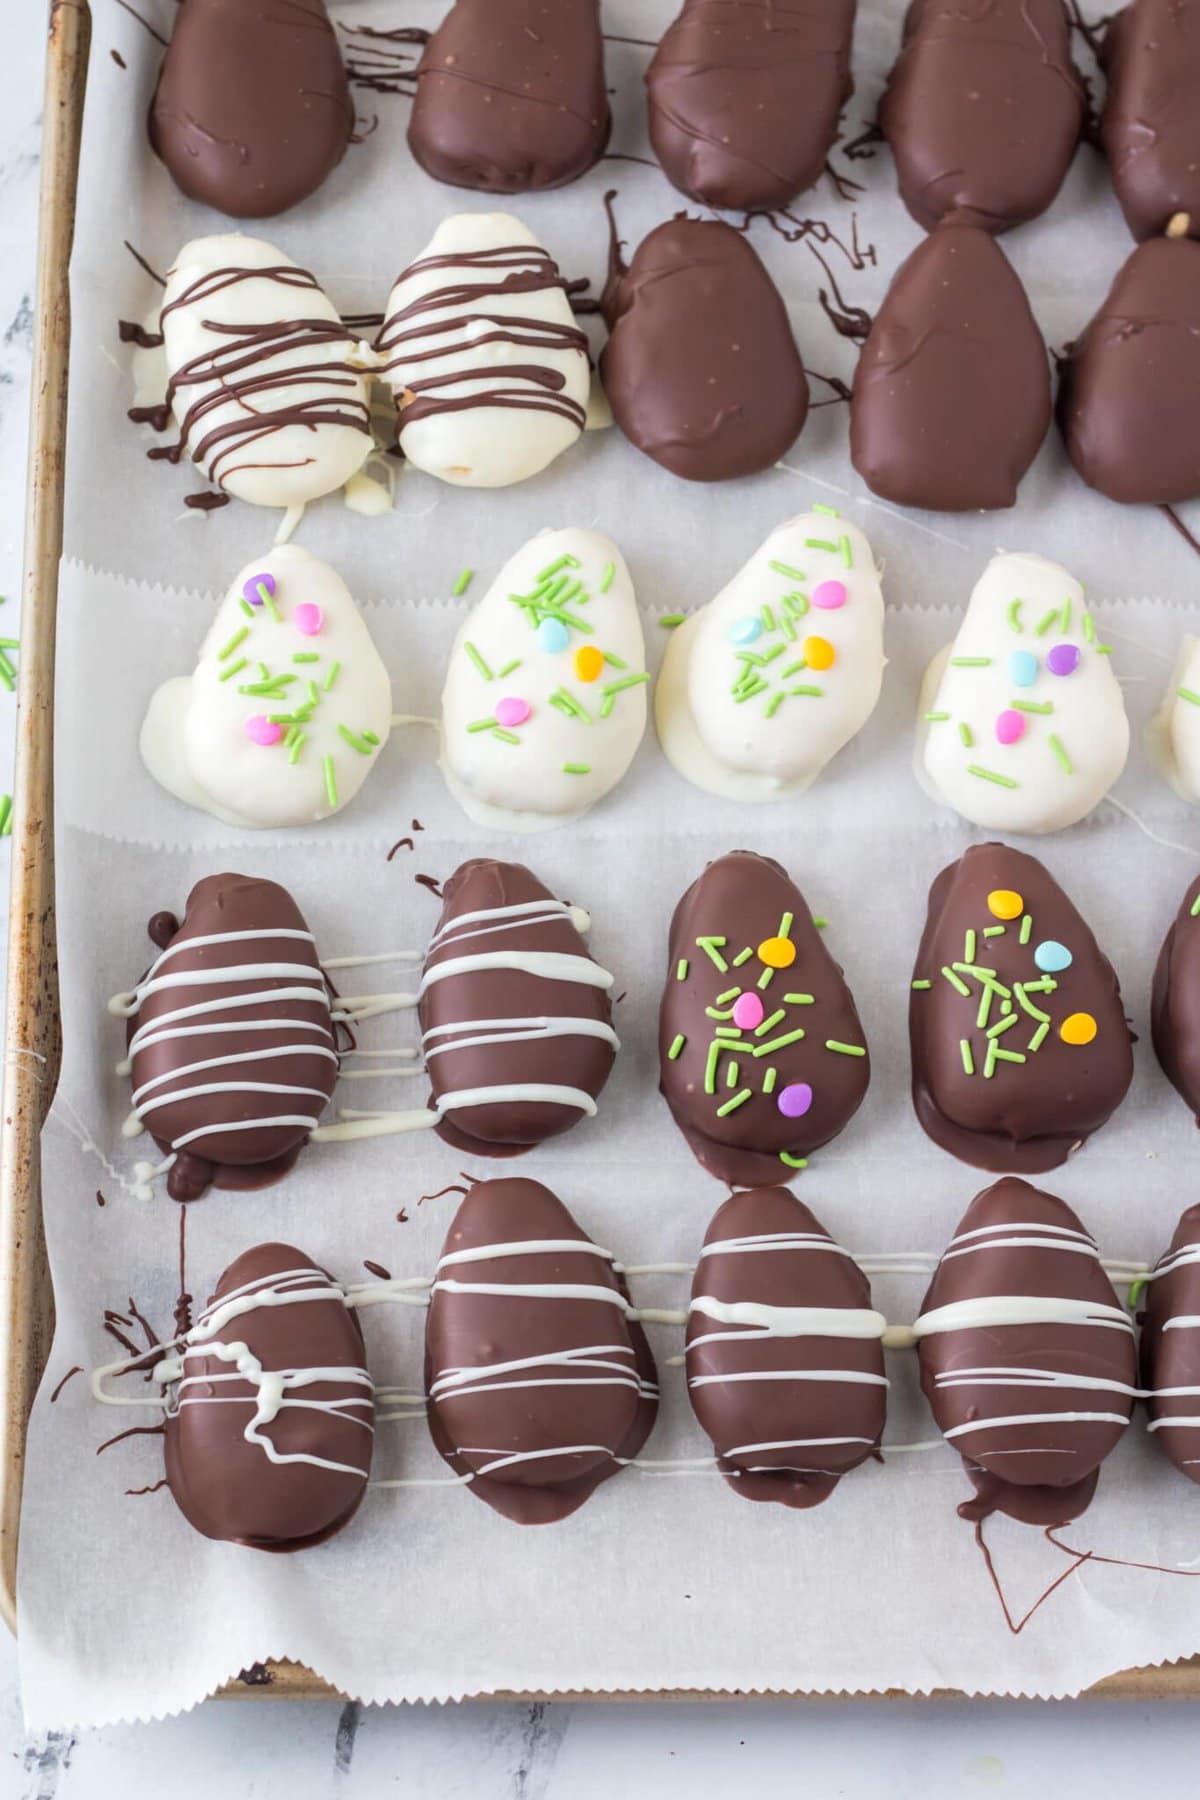 chocolate dipped peanut butter eggs